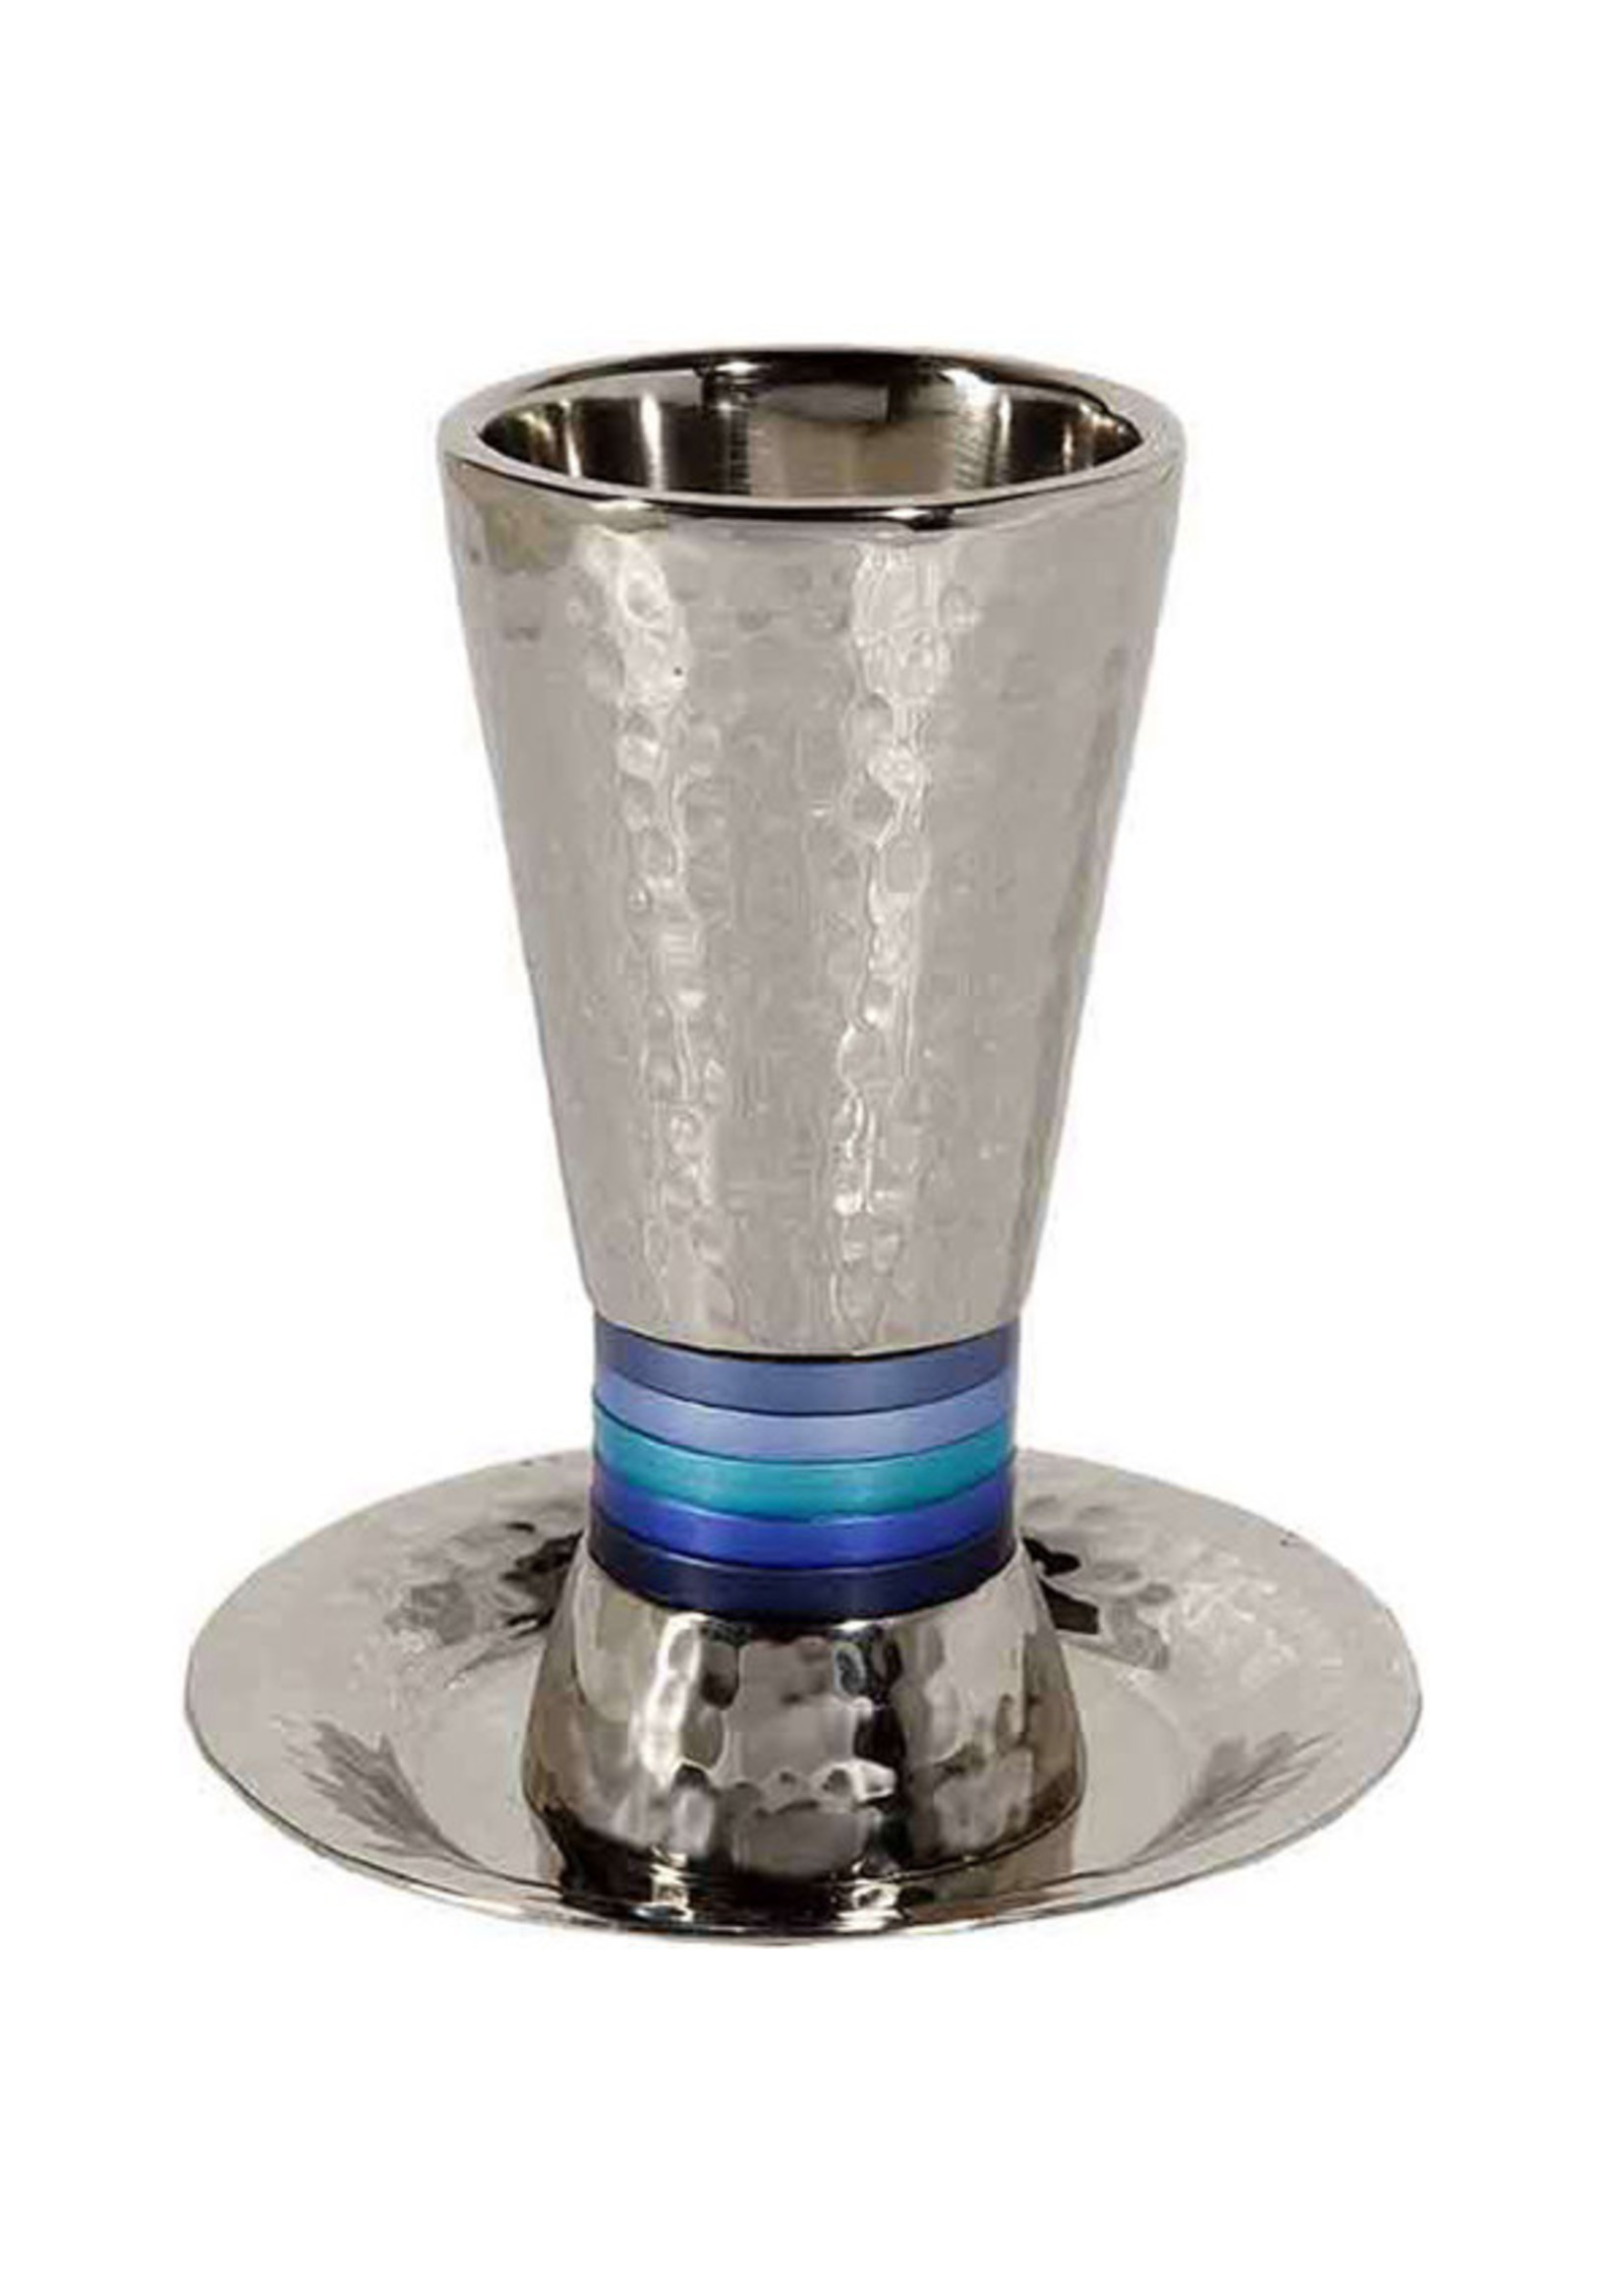 KIDDUSH CUP HAMMERED NICKEL WITH RINGS